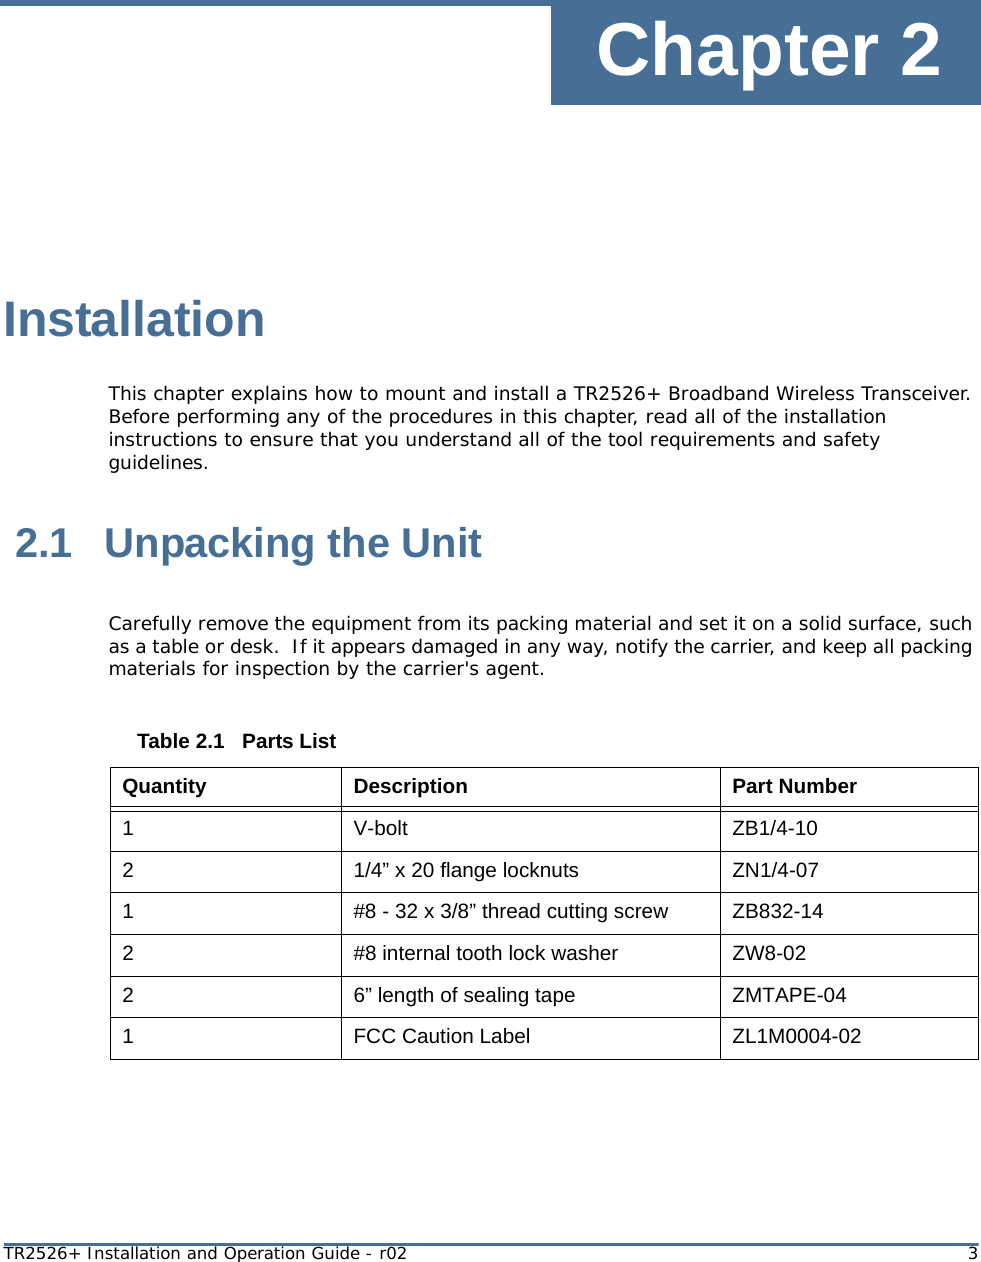 Chapter 2TR2526+ Installation and Operation Guide - r02 3InstallationThis chapter explains how to mount and install a TR2526+ Broadband Wireless Transceiver. Before performing any of the procedures in this chapter, read all of the installation instructions to ensure that you understand all of the tool requirements and safety guidelines. 2.1 Unpacking the UnitCarefully remove the equipment from its packing material and set it on a solid surface, such as a table or desk.  If it appears damaged in any way, notify the carrier, and keep all packing materials for inspection by the carrier&apos;s agent. Table 2.1   Parts ListQuantity Description Part Number1V-bolt ZB1/4-1021/4” x 20 flange locknuts ZN1/4-071#8 - 32 x 3/8” thread cutting screw ZB832-142#8 internal tooth lock washer ZW8-0226” length of sealing tape ZMTAPE-041FCC Caution Label ZL1M0004-02